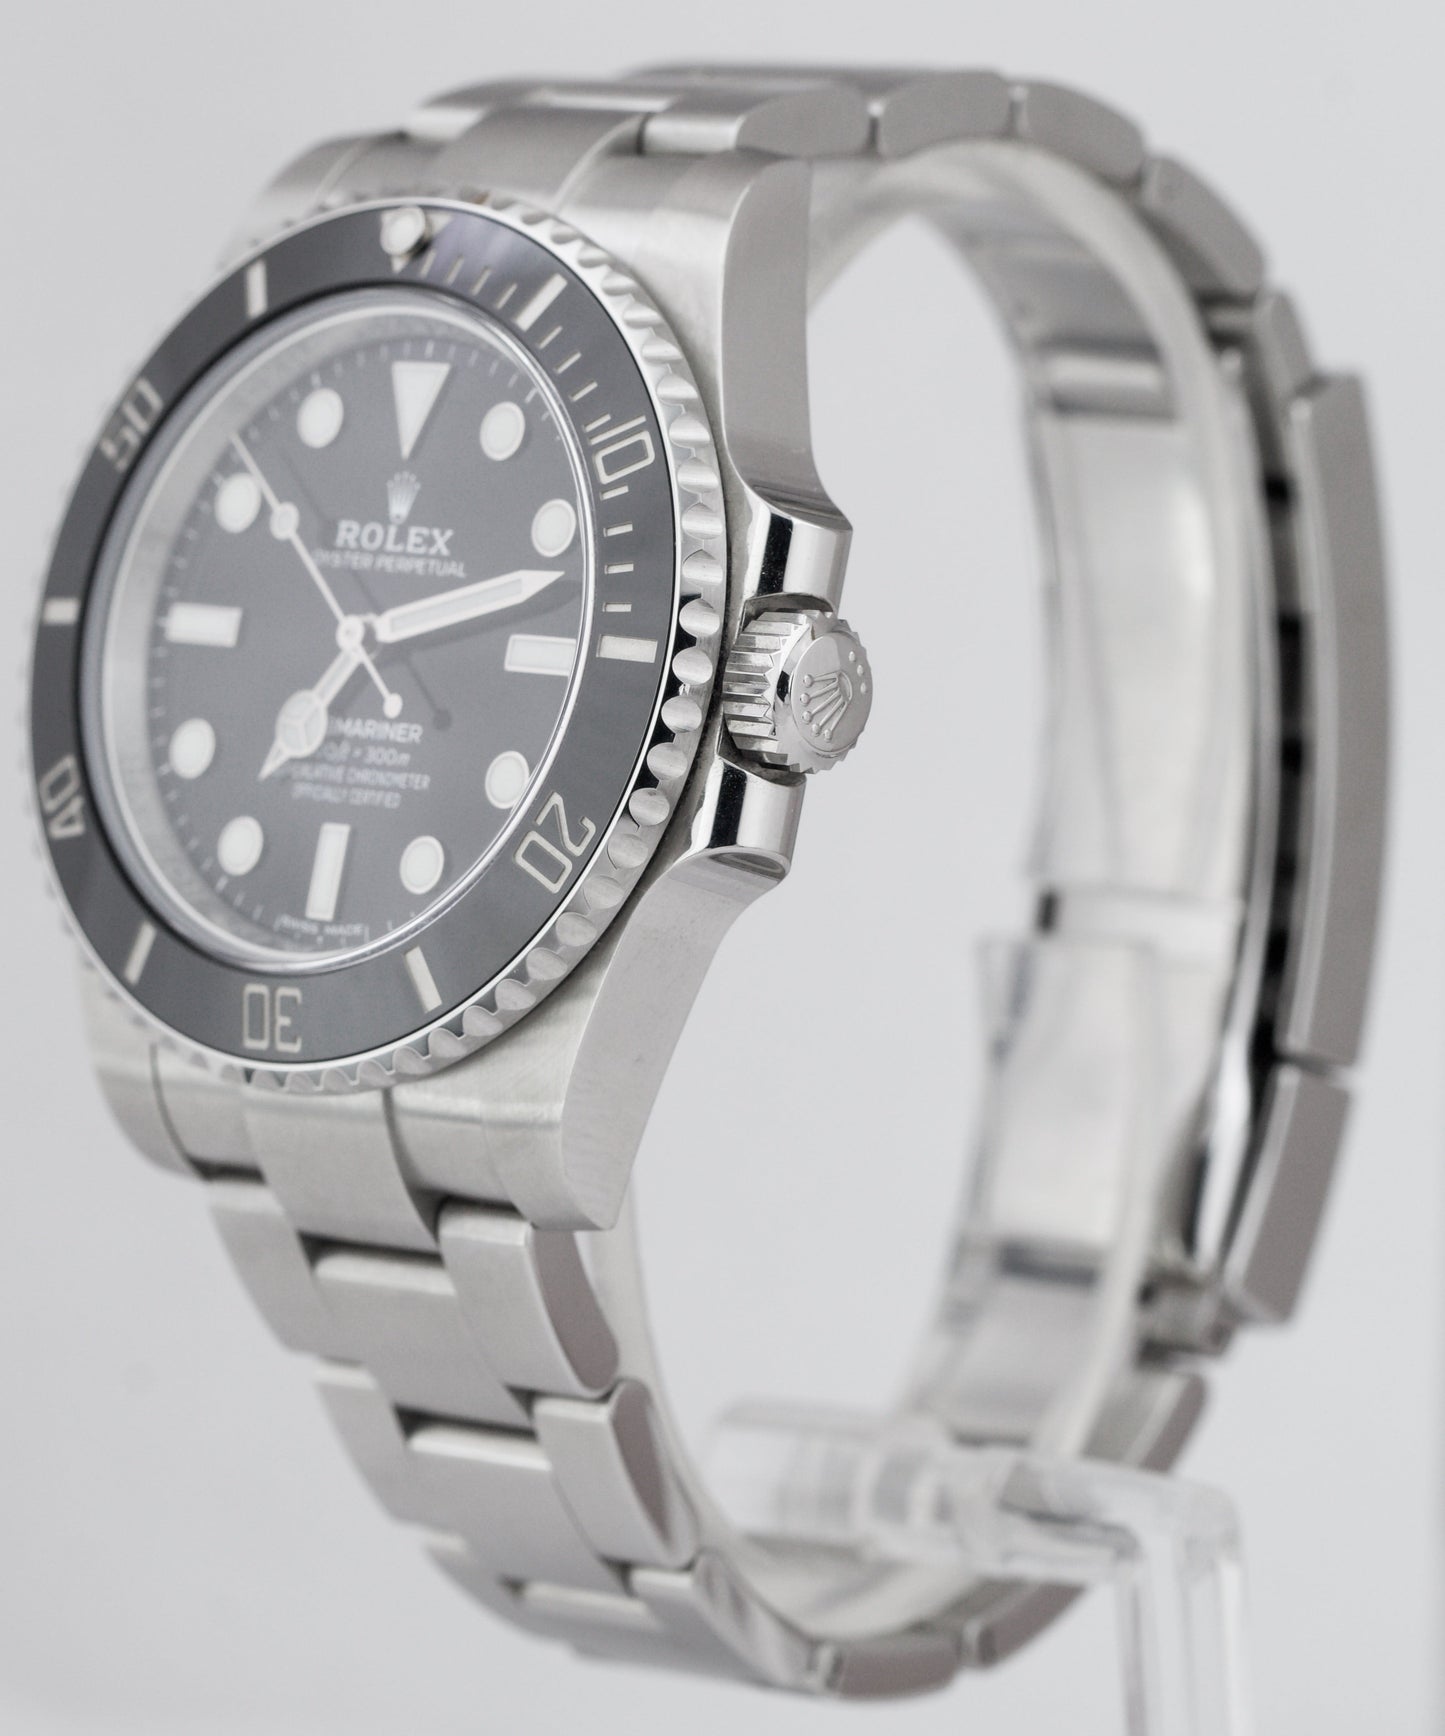 MINT Rolex Submariner No-Date Stainless 40mm Black Ceramic Dive Watch 114060